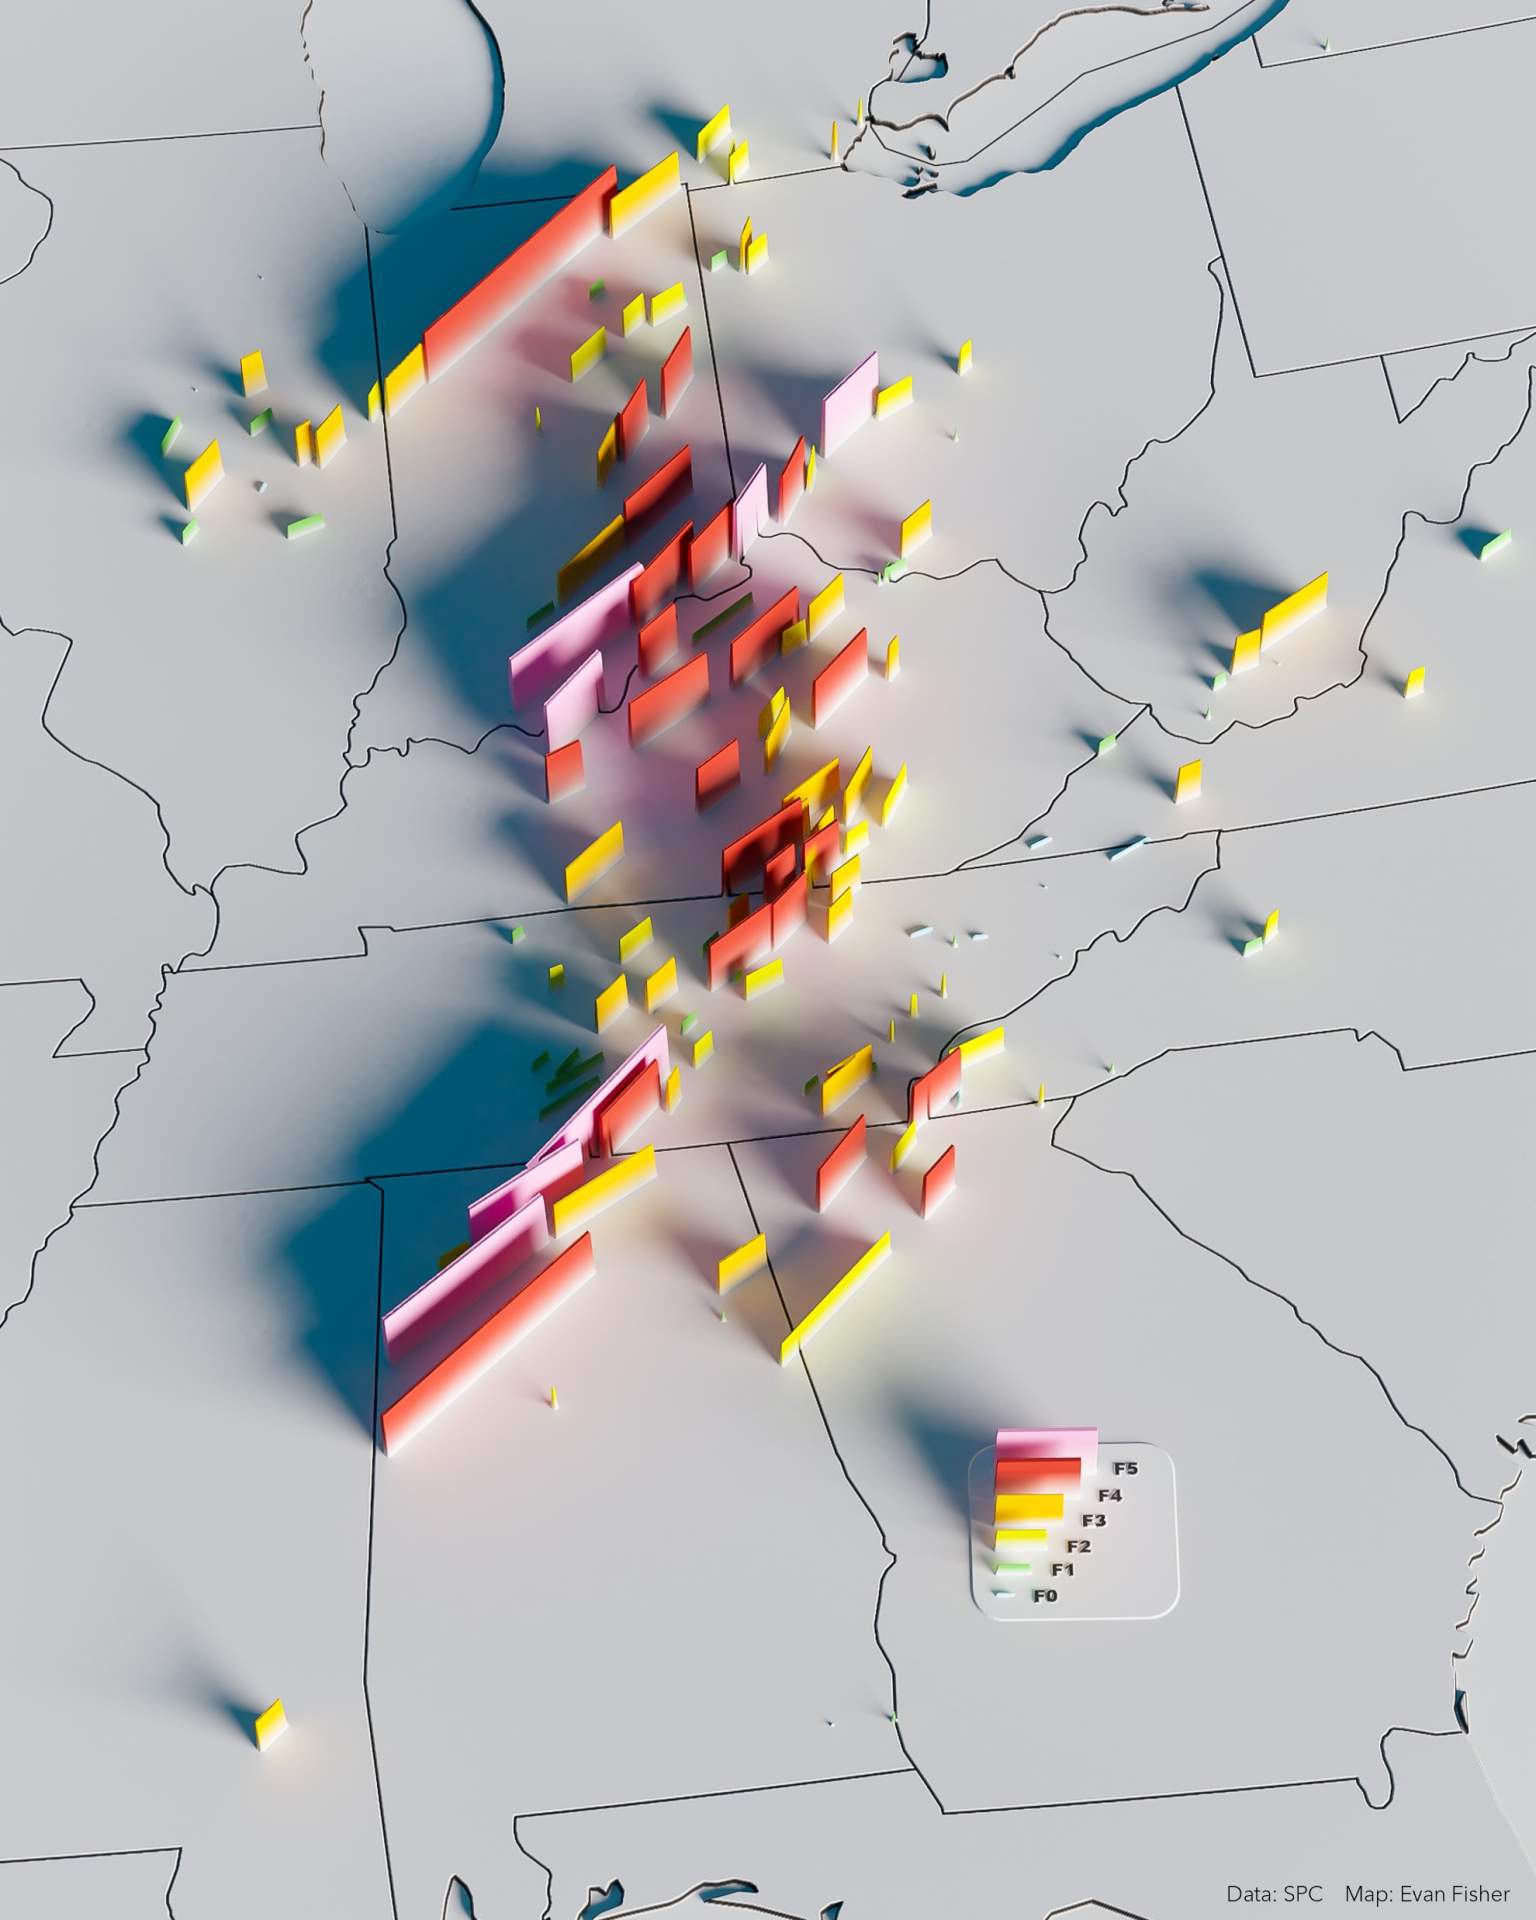 Fig. 3: Trajectories of the various tornadoes during the 1974 super outbreak.; Source: Evan Fisher (via Twitter)